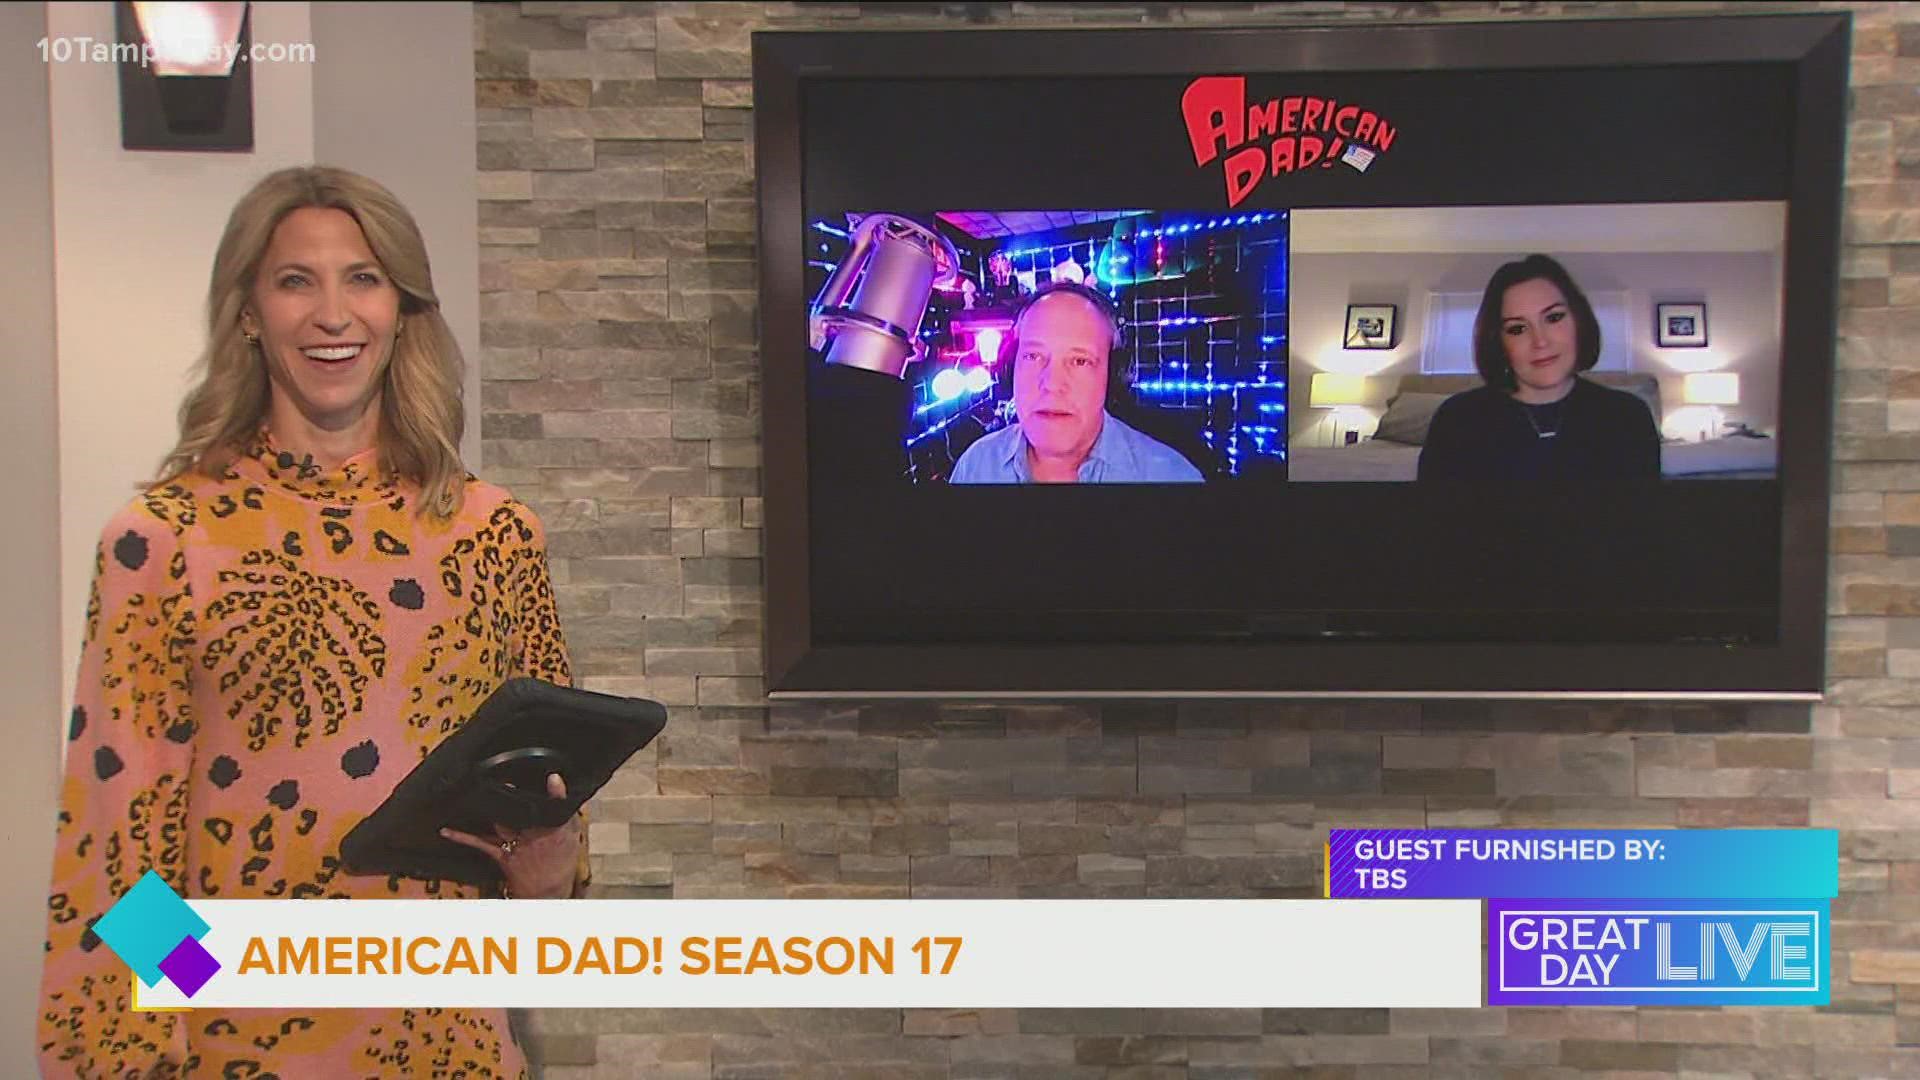 “American Dad!” actors join GDL to talk about the upcoming premier.